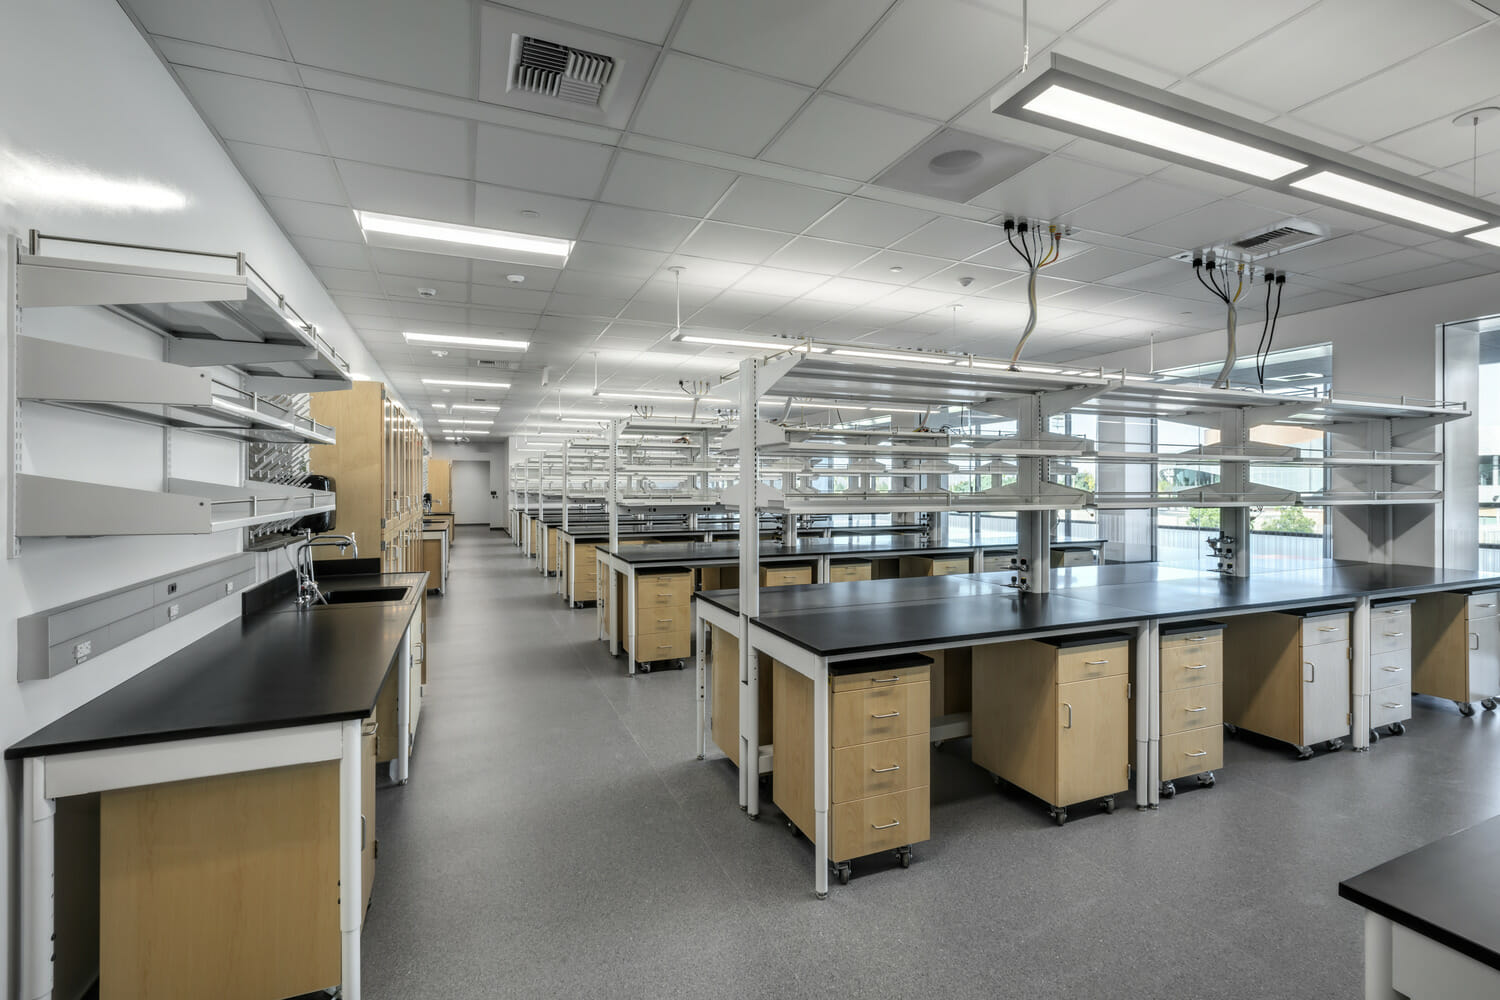 A technology lab with a lot of tables and shelves.